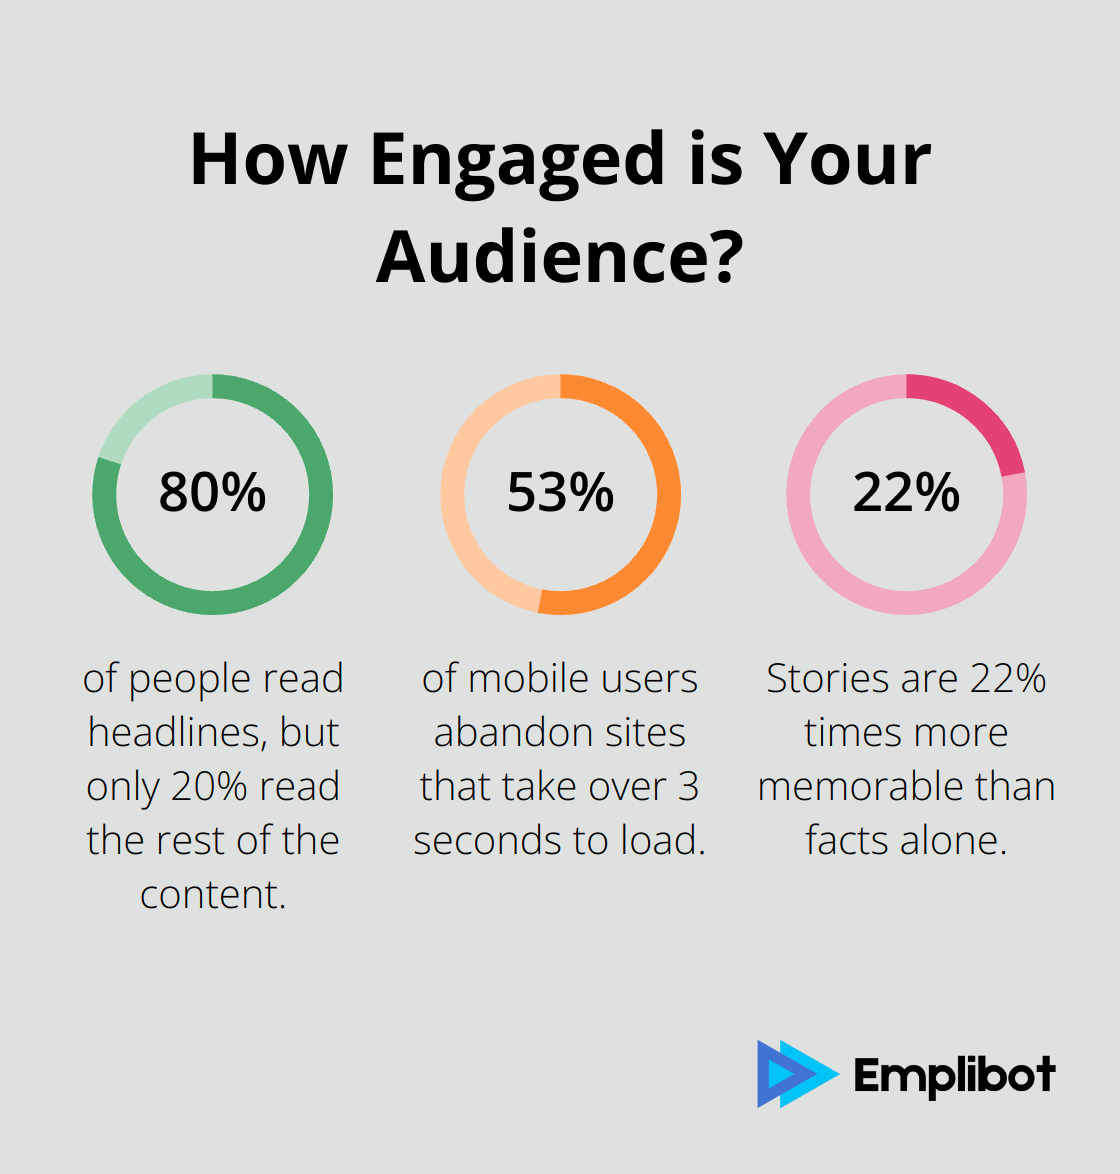 Fact - How Engaged is Your Audience?